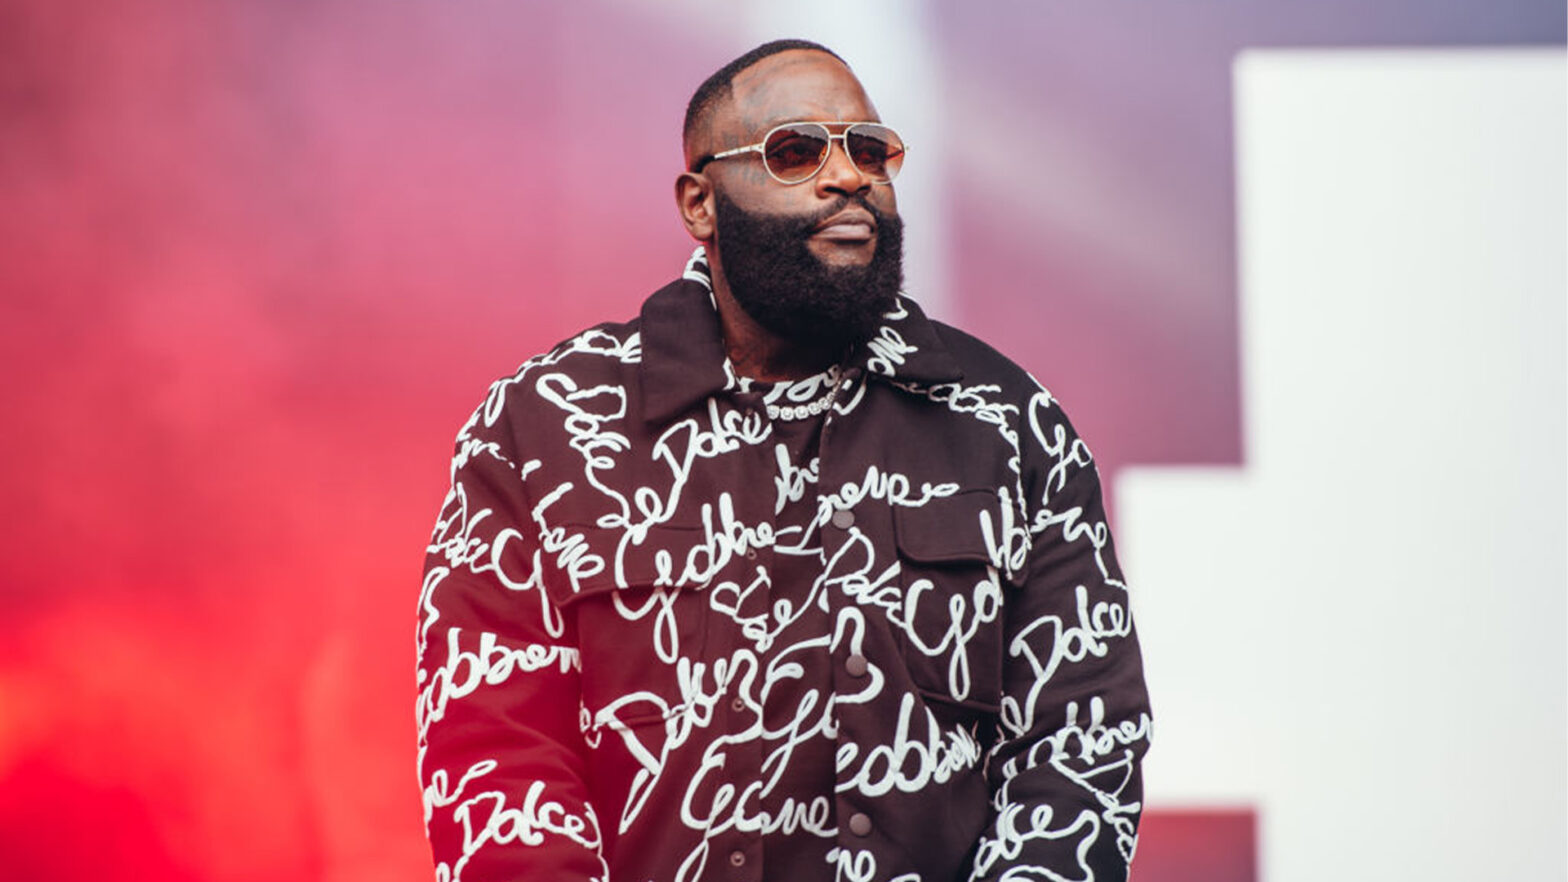 AFROTECH Conference: Rick Ross, The Biggest Boss, Set To Headline The Music Stage In Austin, TX